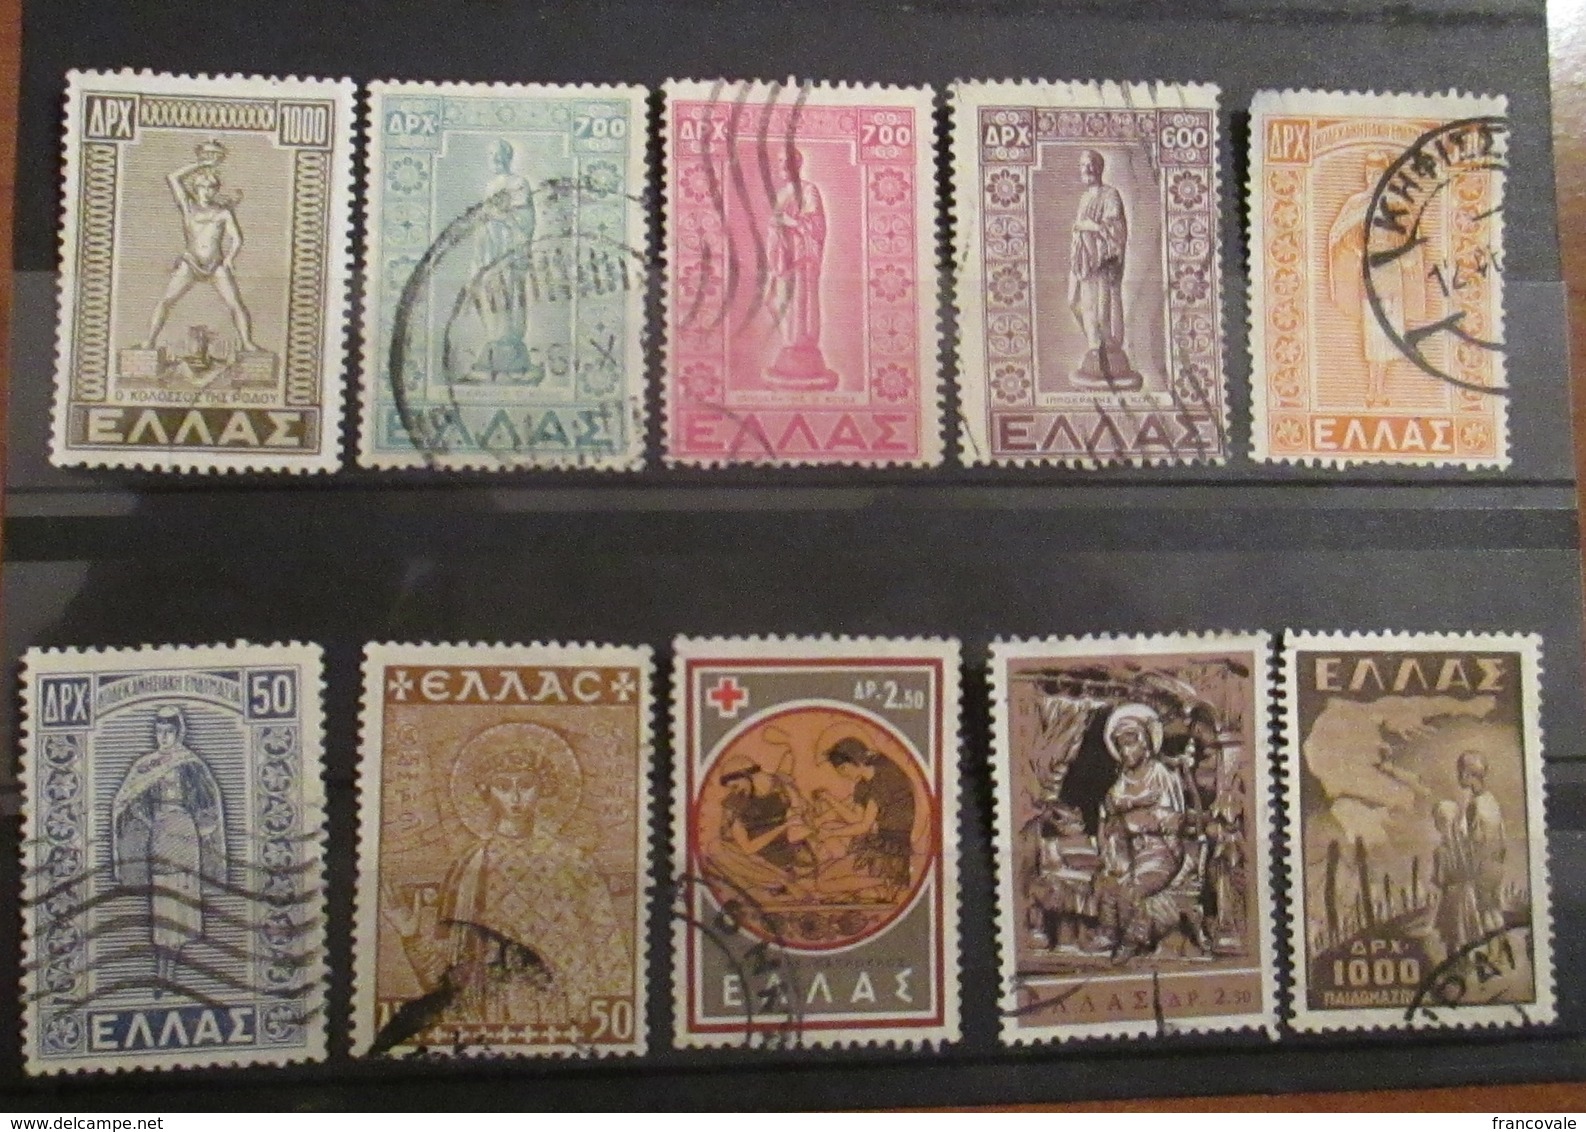 Grecia Greece 1945 - 1960 Statue Of Hippocrates And Other Stamps Used - Gebraucht